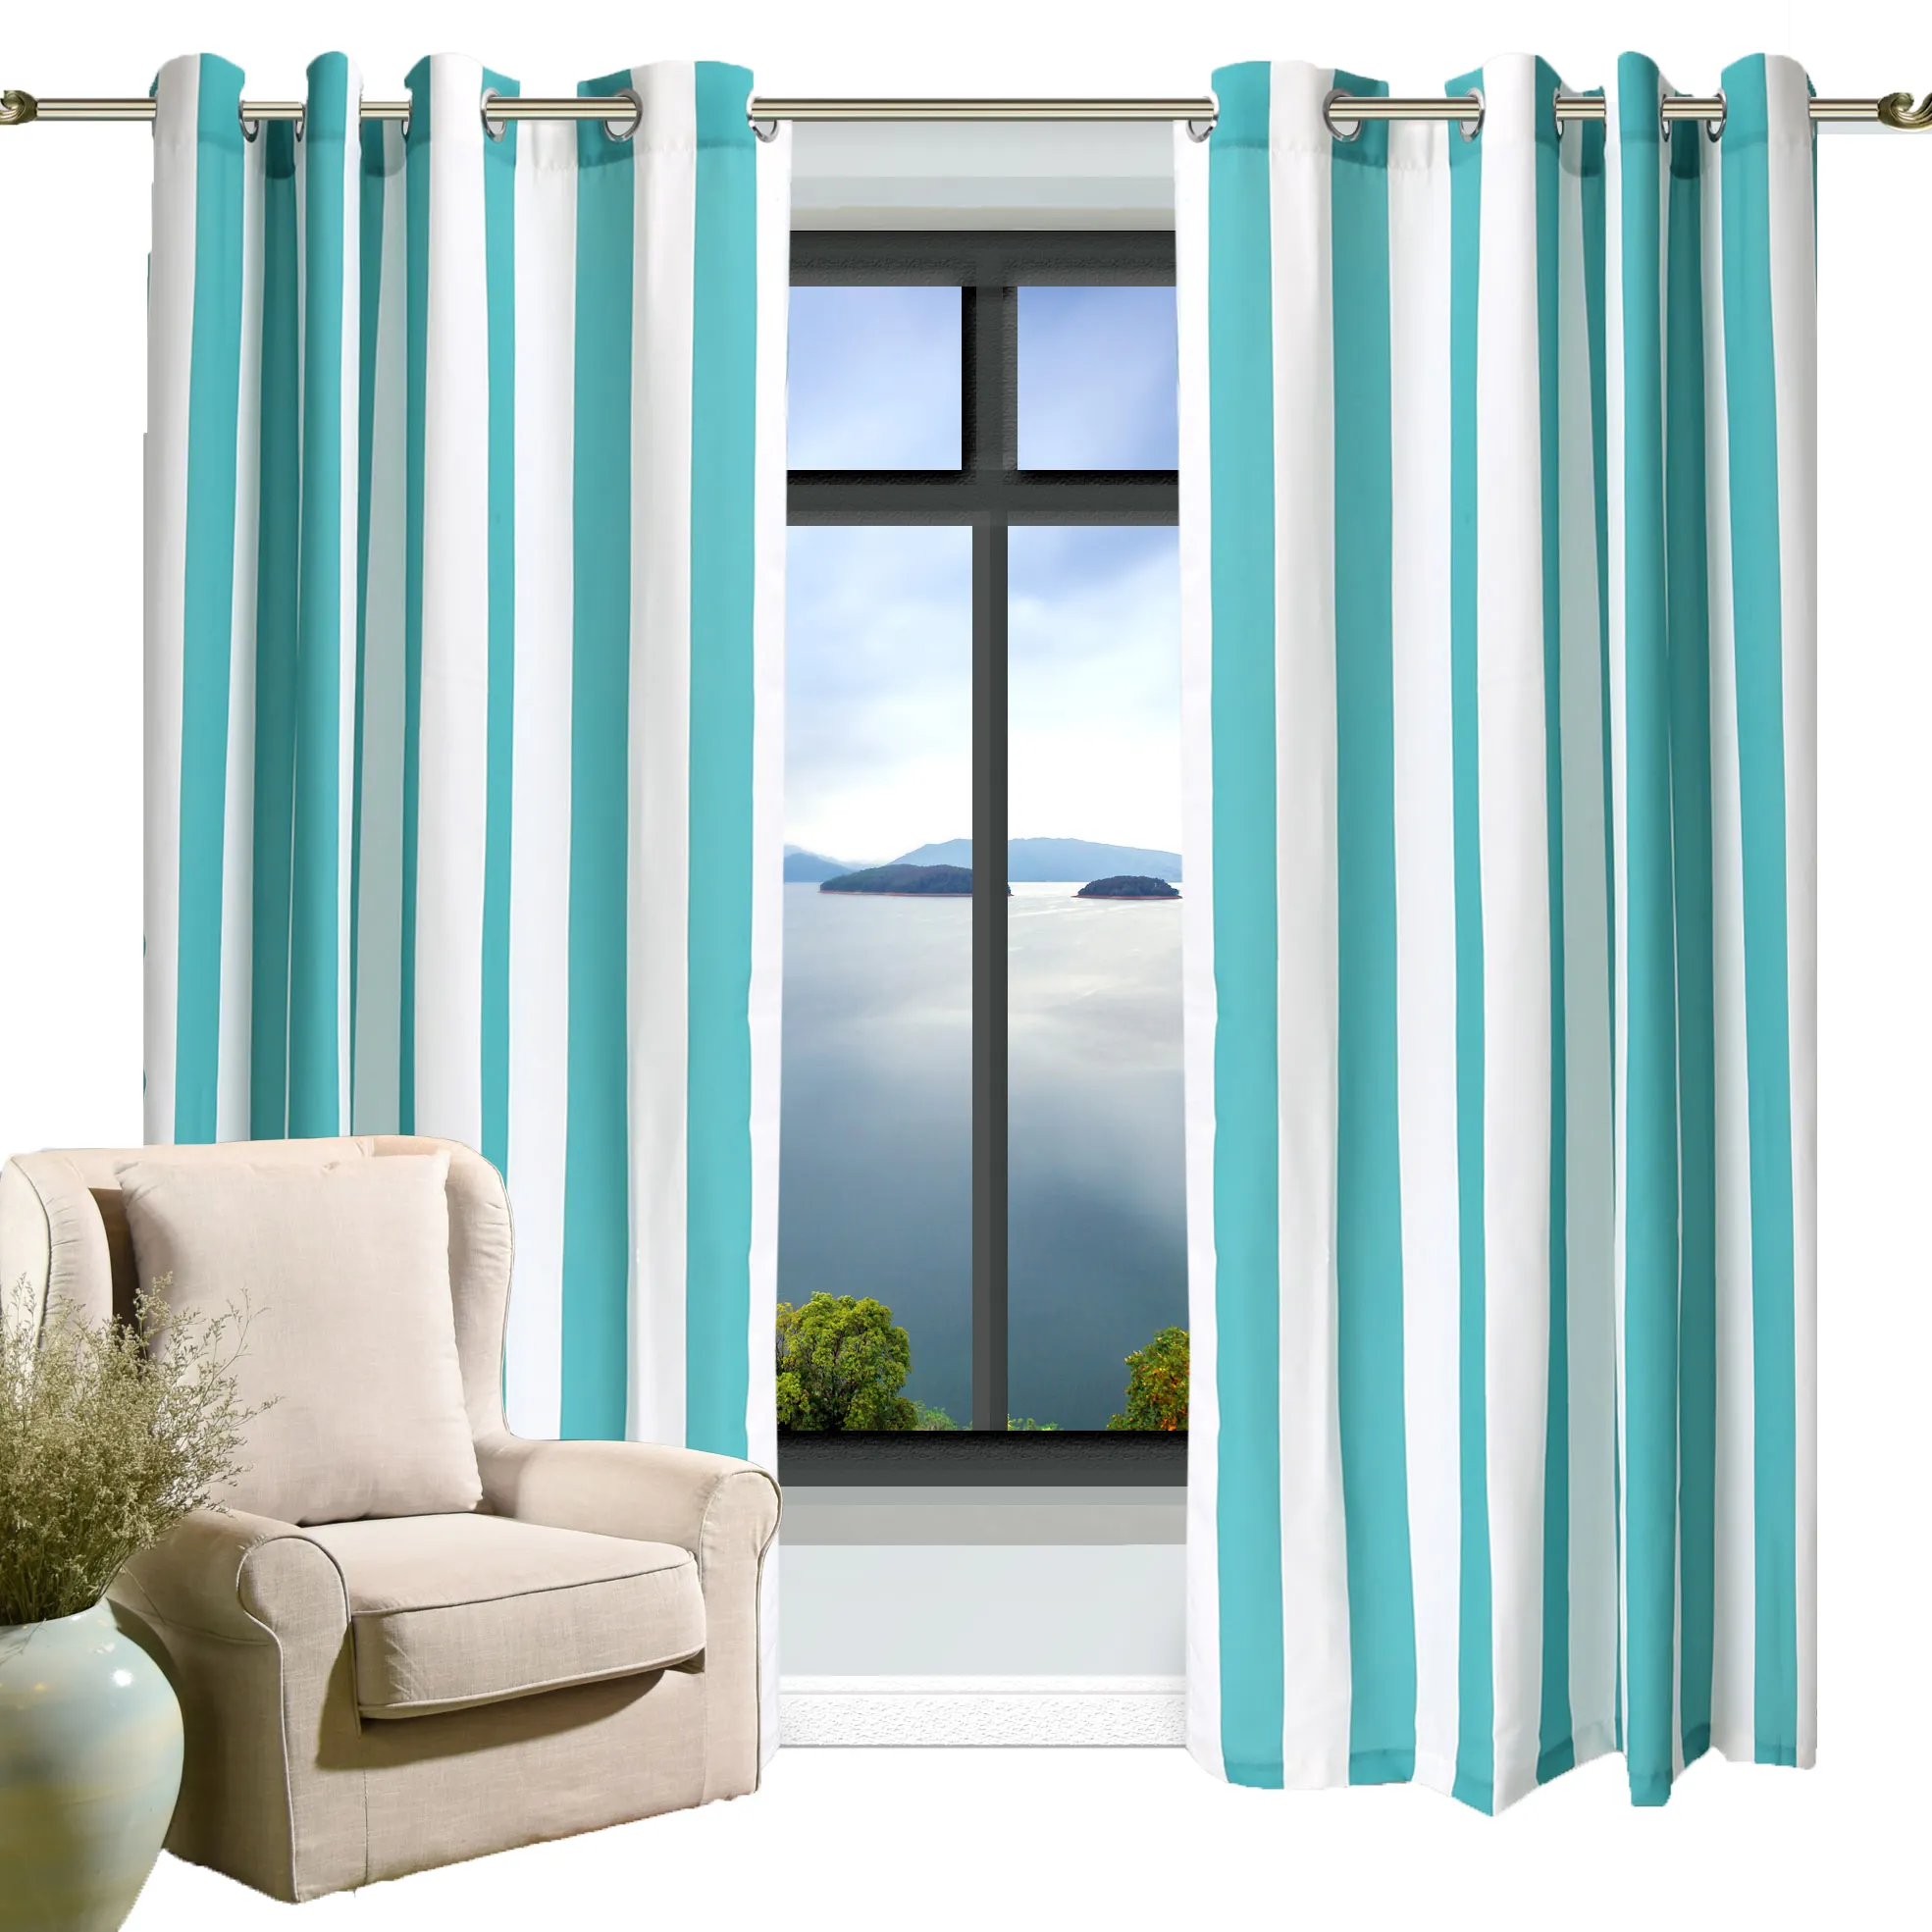 Cheap home decorative full light shading polyester window curtain